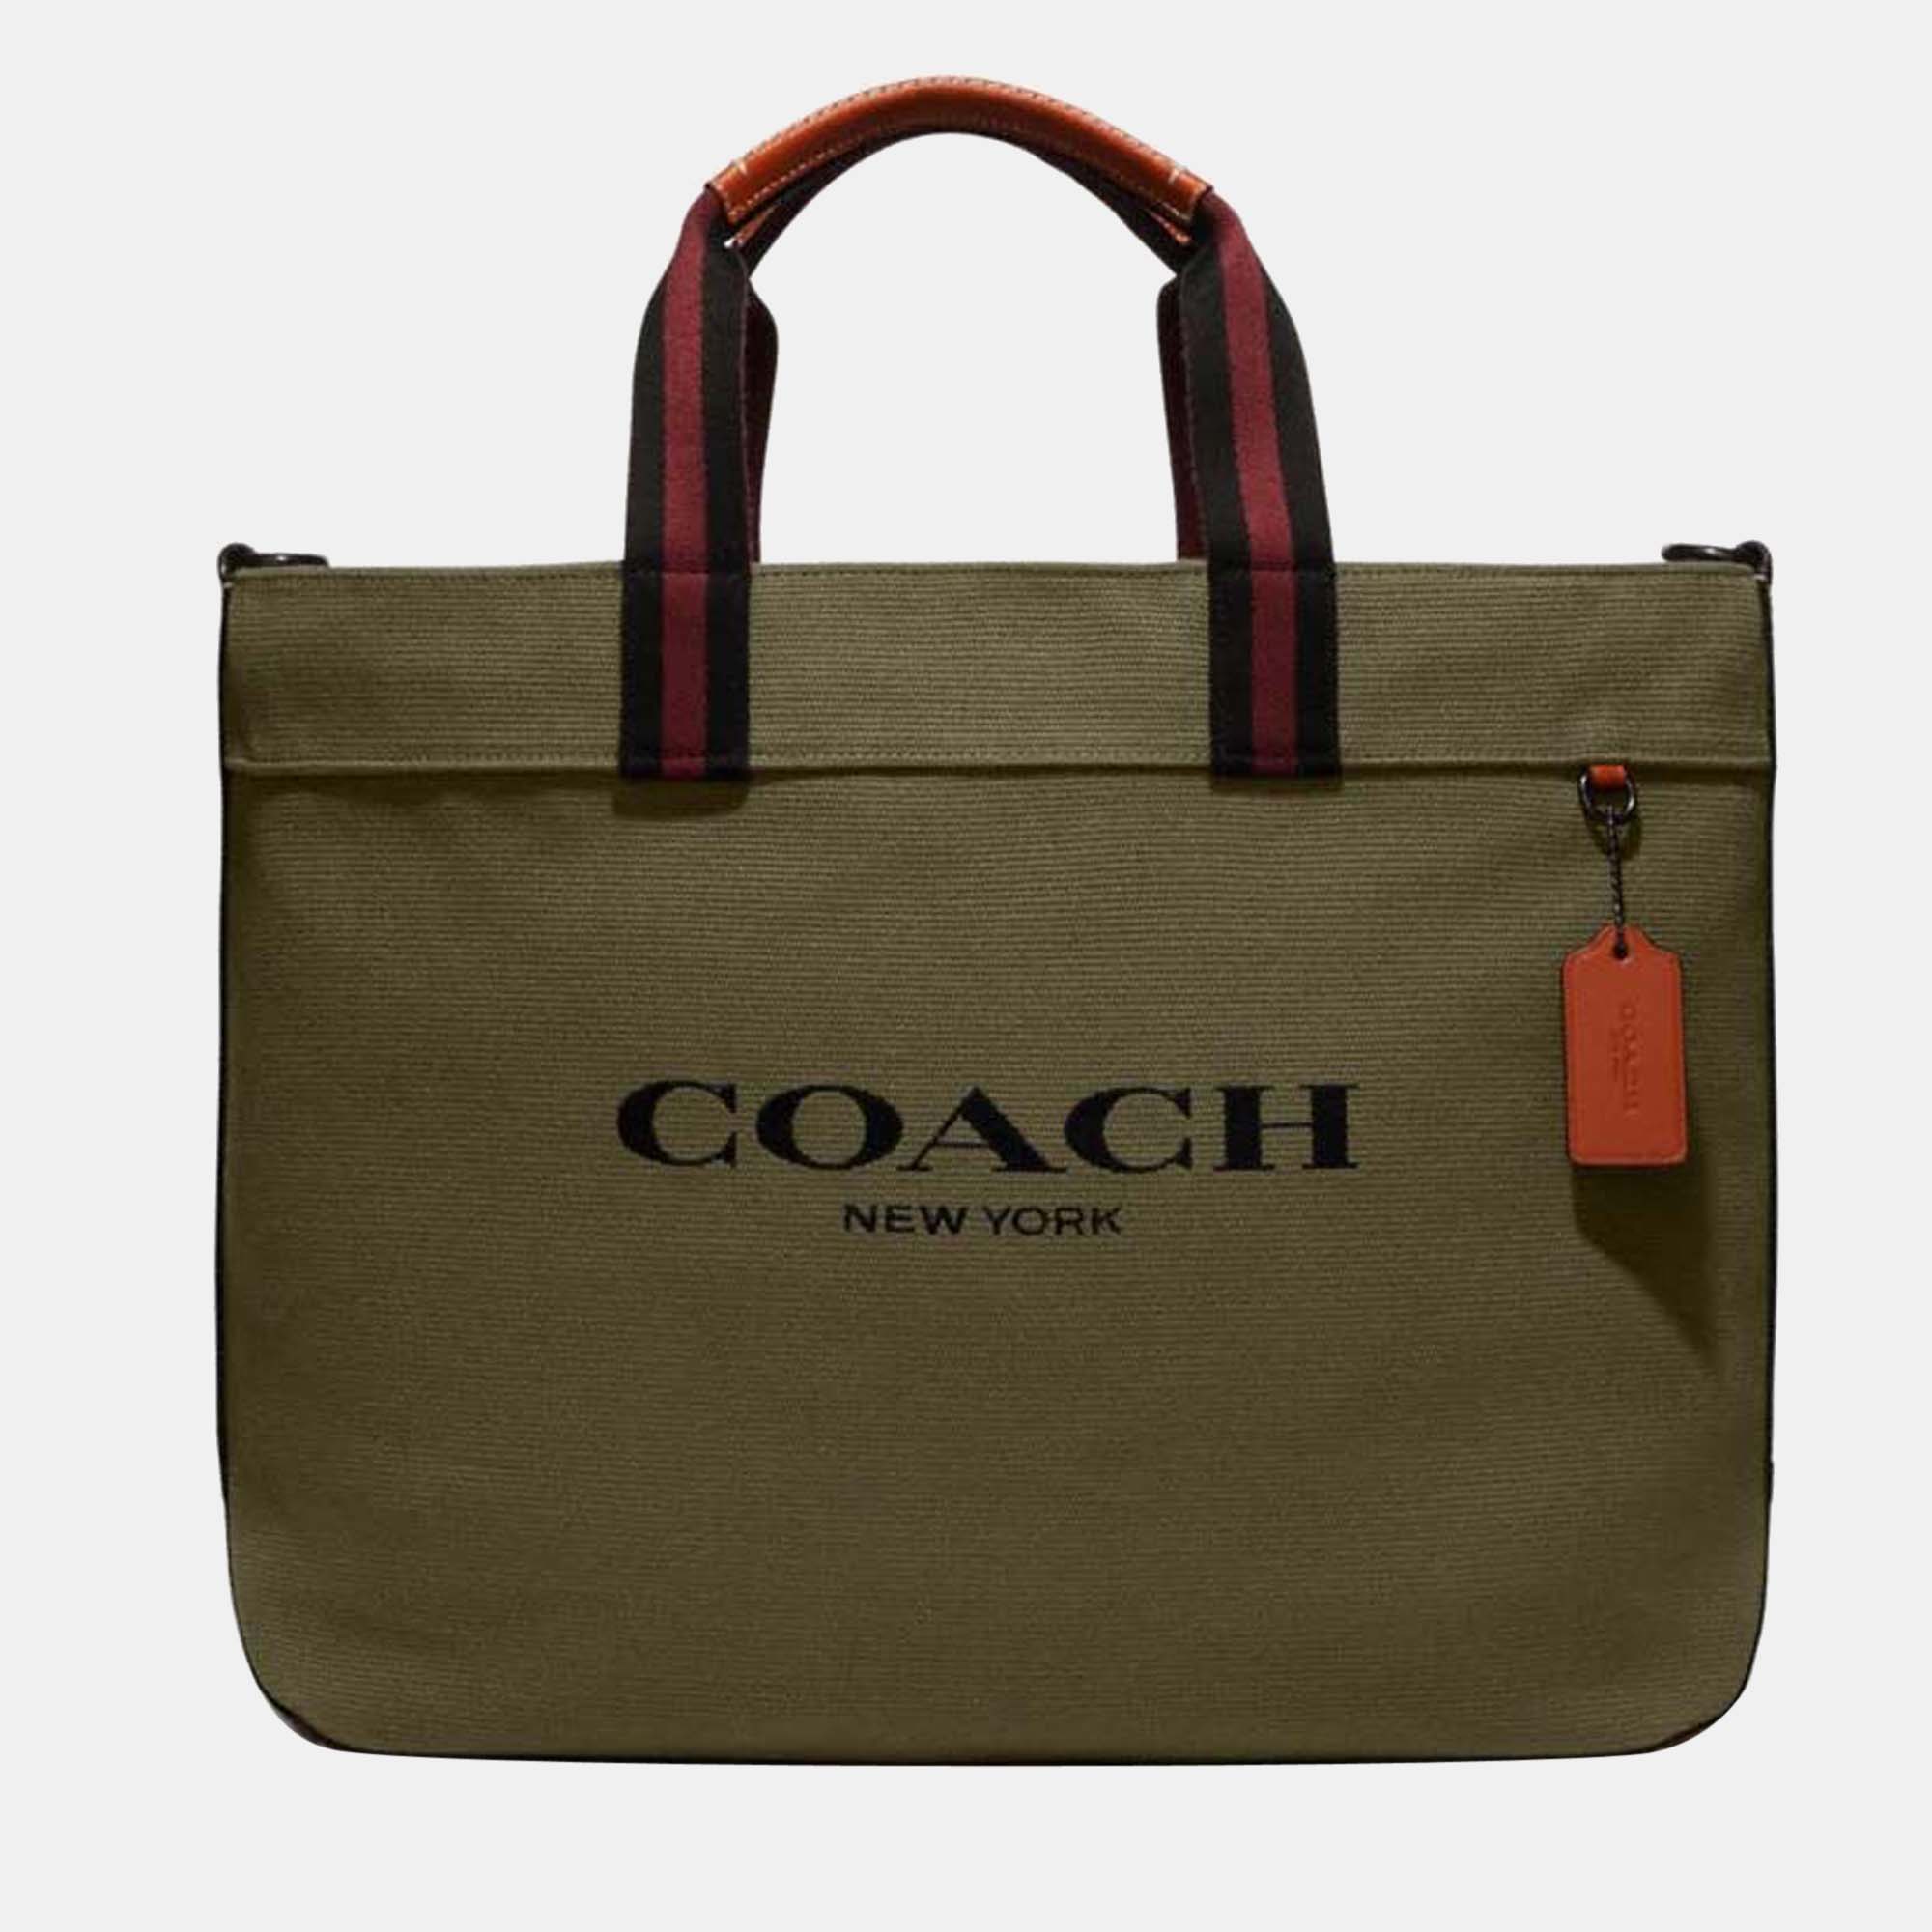 Practical and chic are some words that describe this bag Crafted meticulously the creation is equipped with a well spaced interior and an easy to carry experience. Carry it to casual outings or shopping sprees youll look stylish